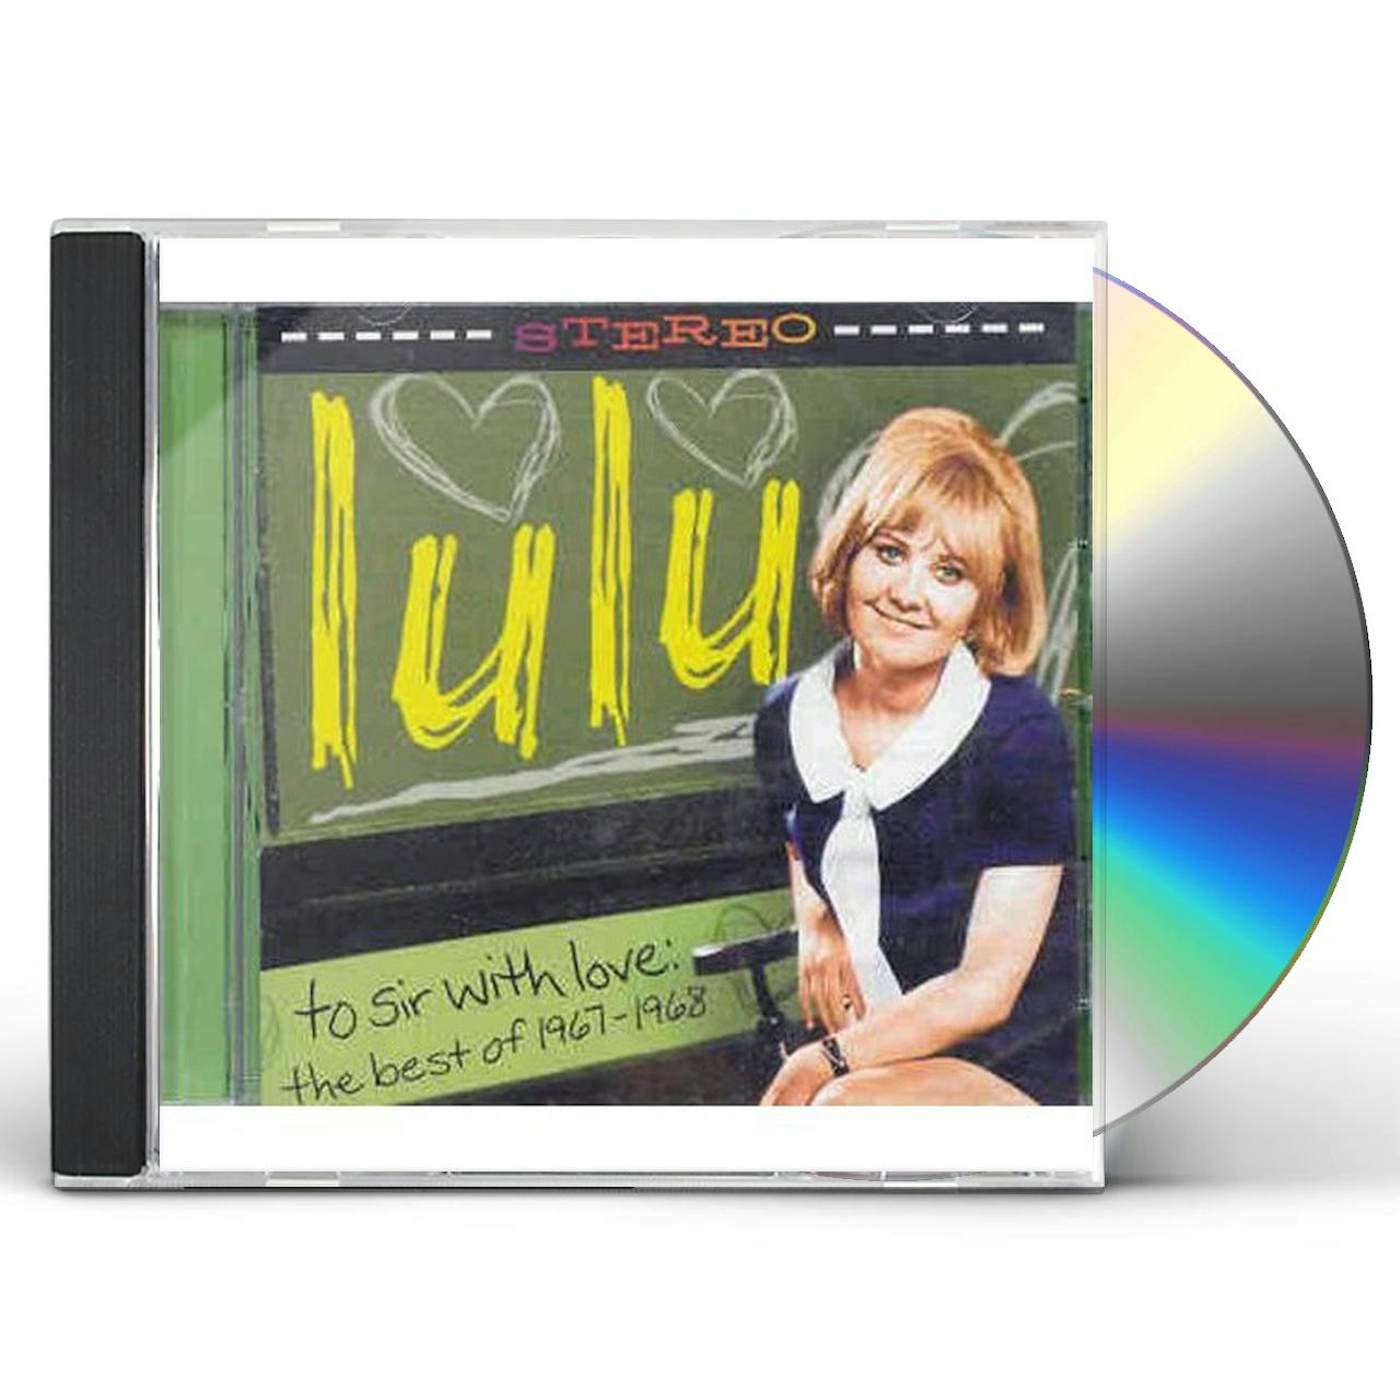 Lulu TO SIR WITH LOVE: THE BEST OF 1967-1968 CD